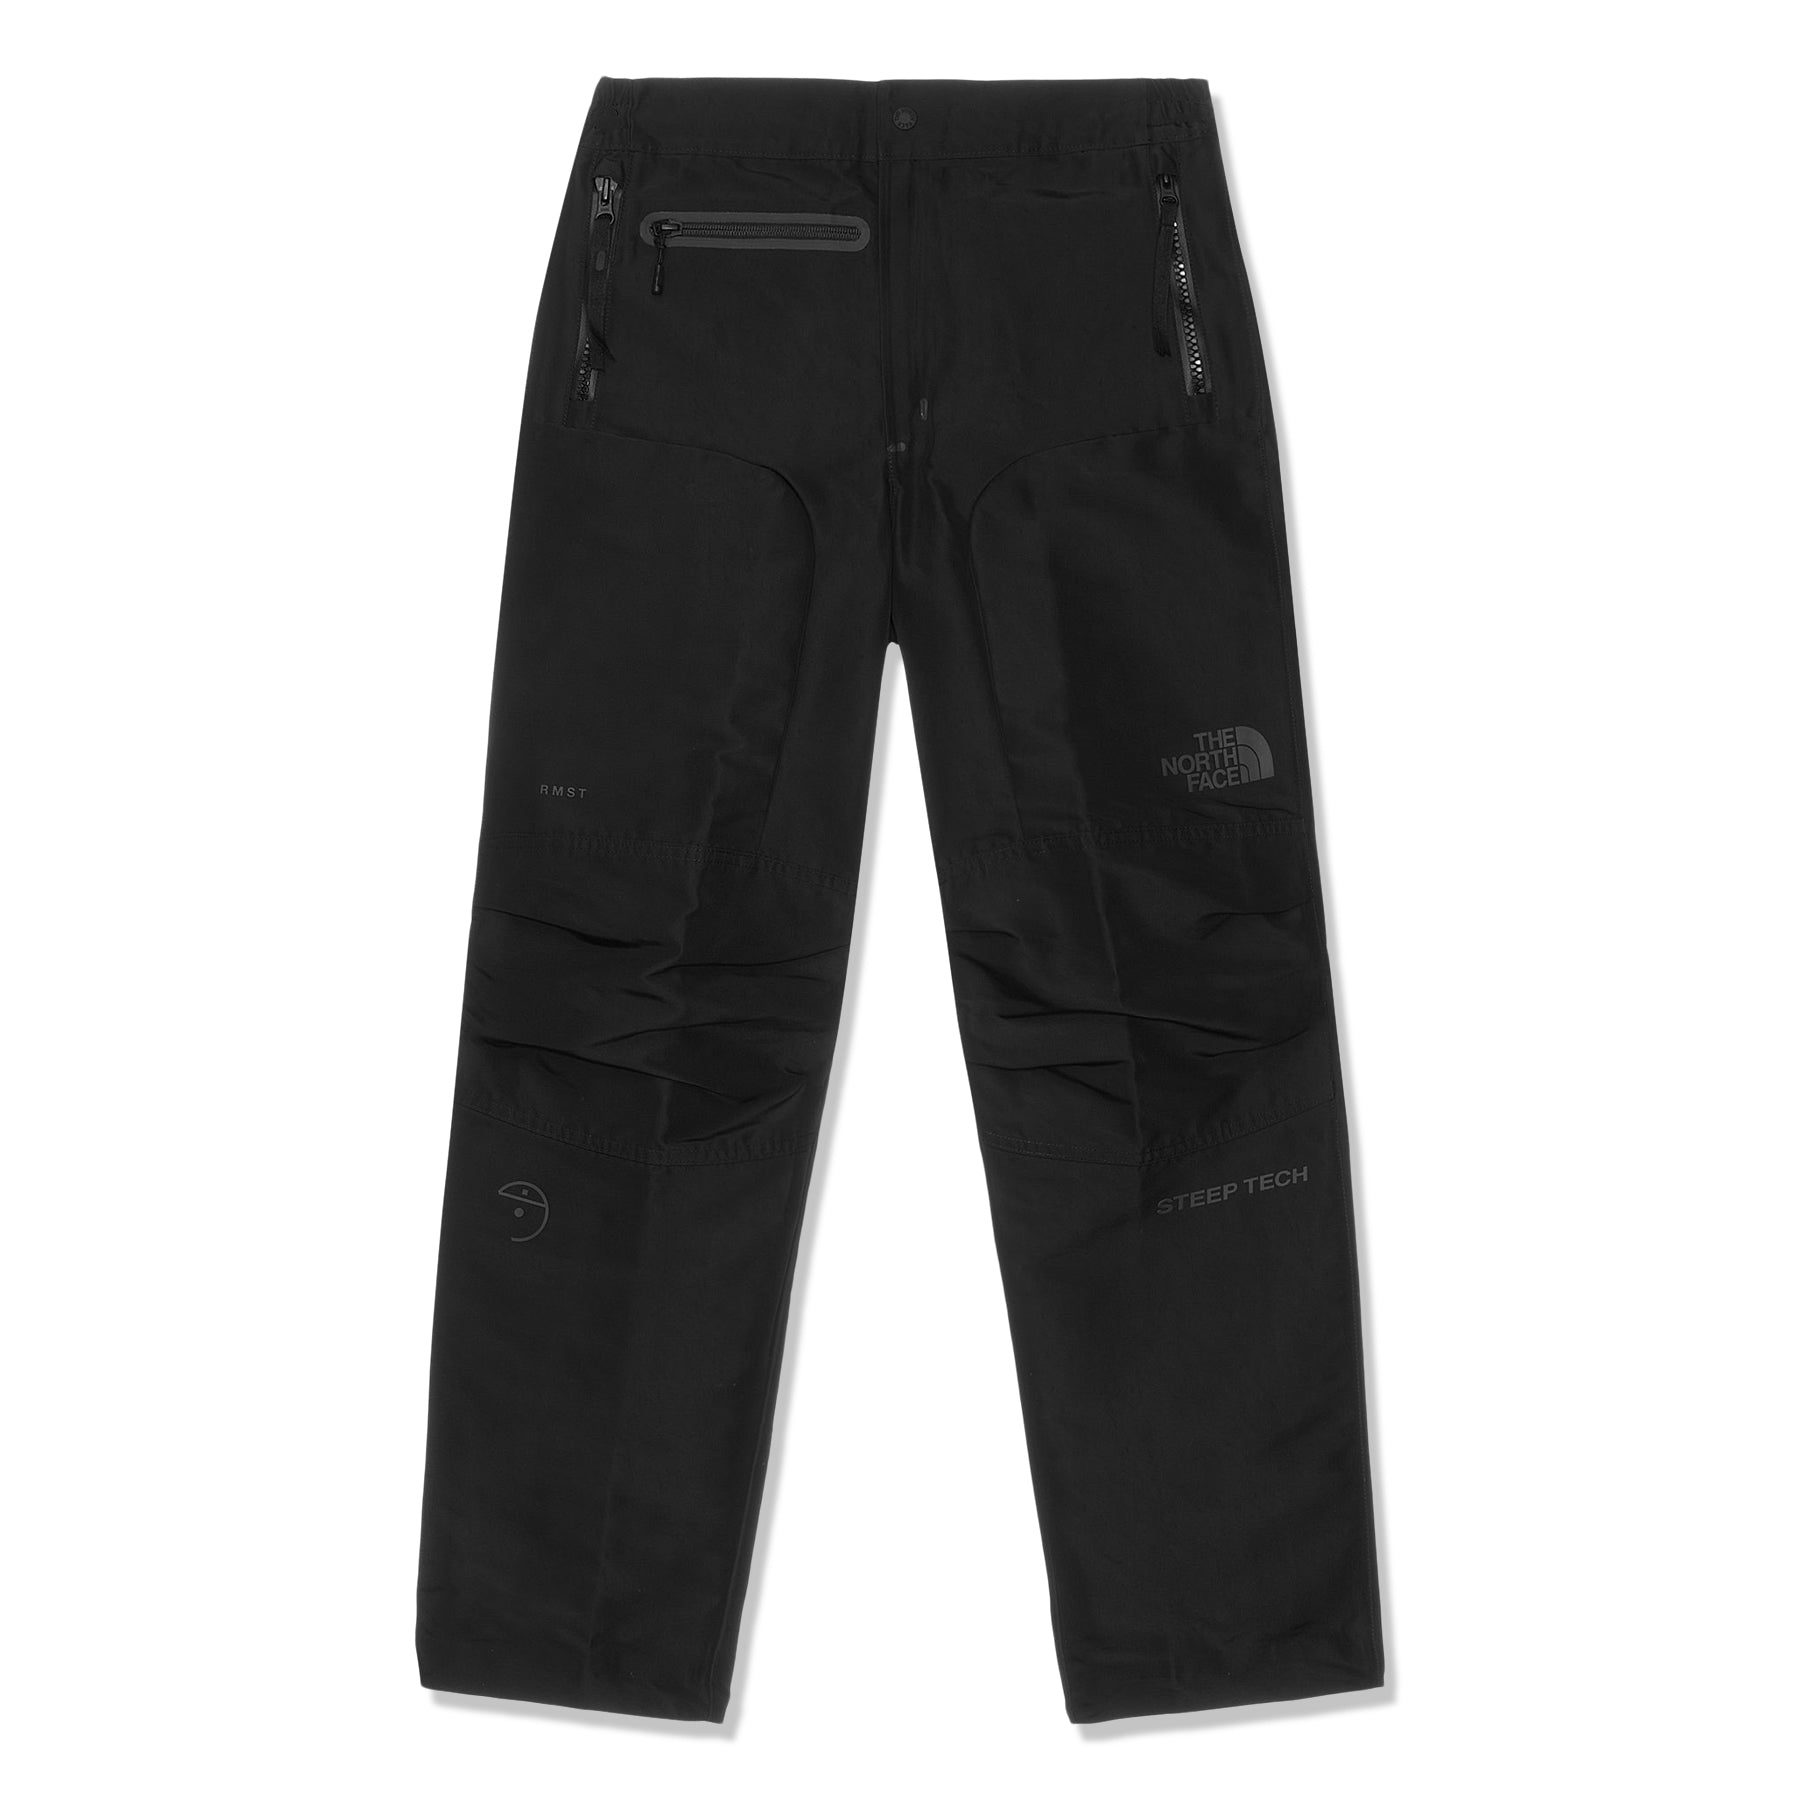 Steep Tech pants in orange - THE NORTH FACE BLACK SERIES